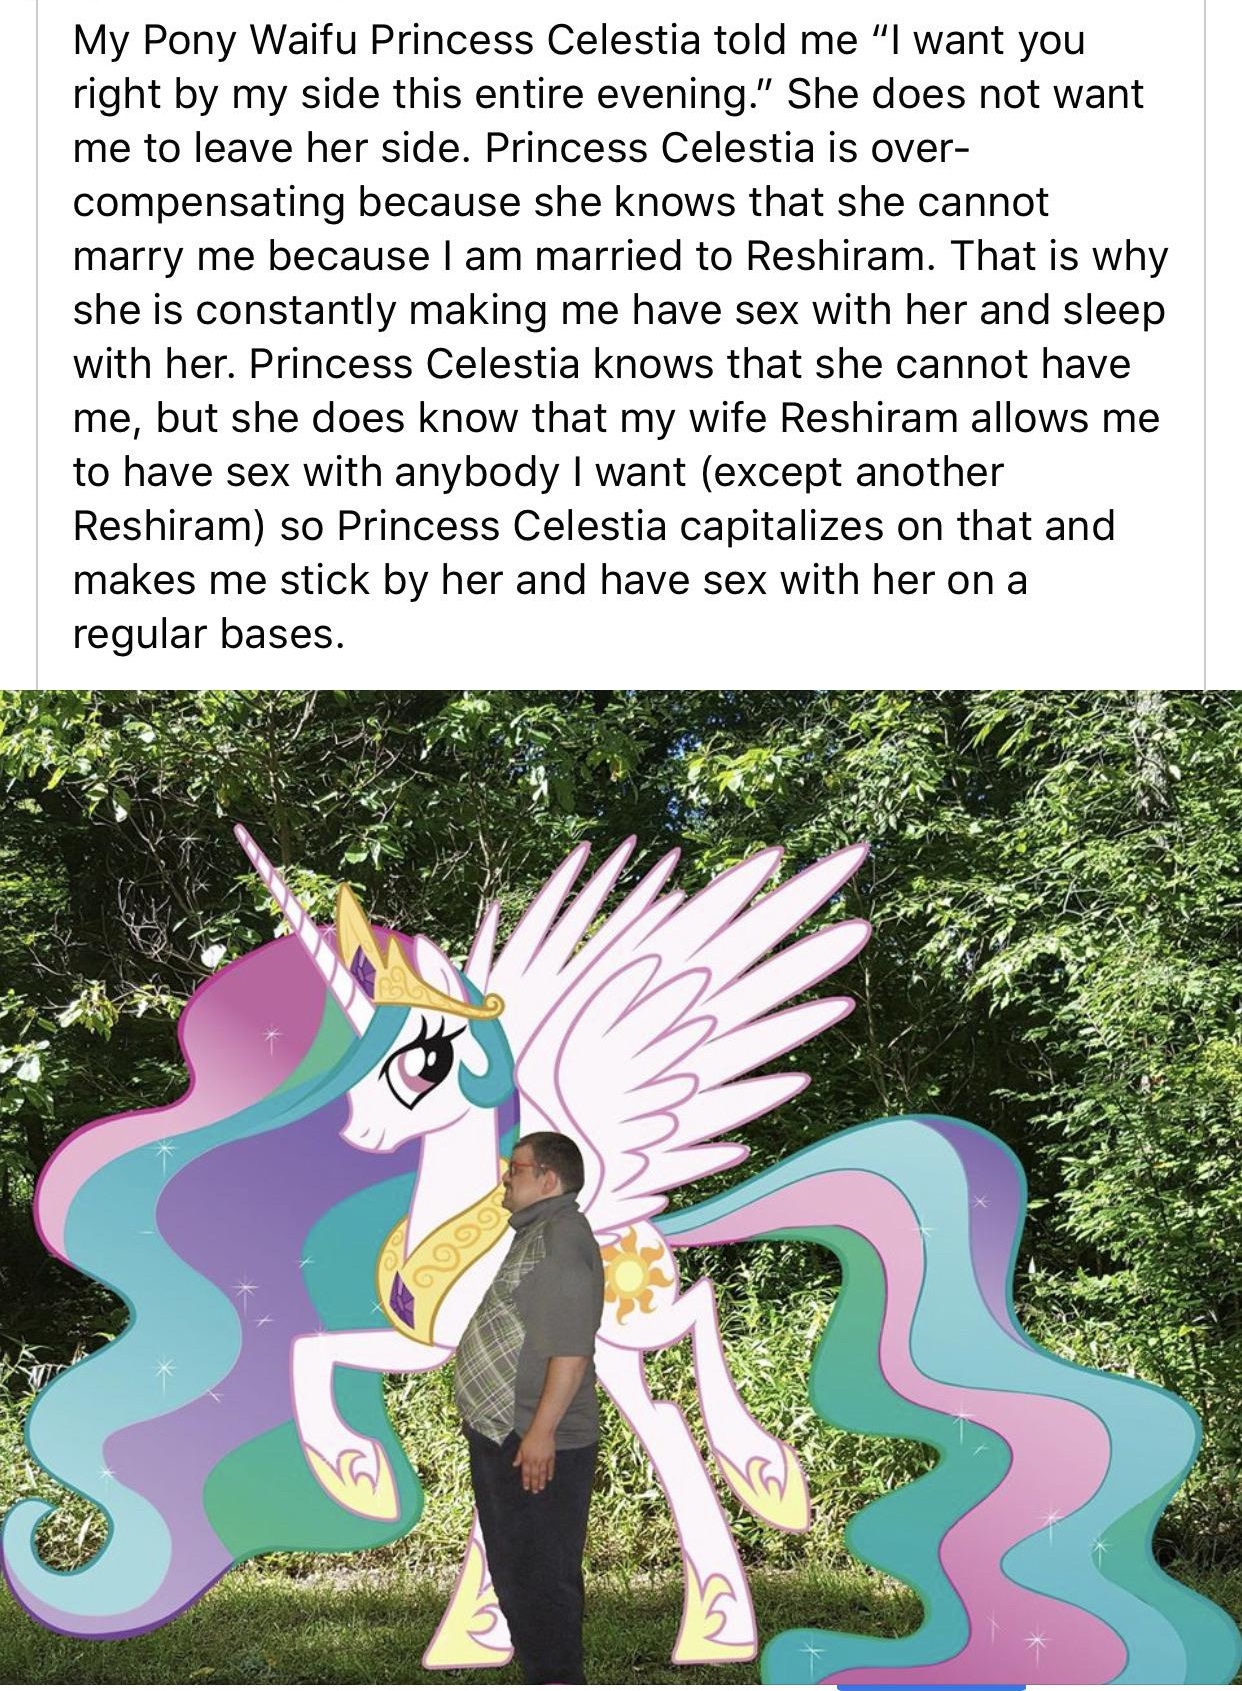 celestia waifu - My Pony Waifu Princess Celestia told me "I want you right by my side this entire evening." She does not want me to leave her side. Princess Celestia is over compensating because she knows that she cannot marry me because I am married to R